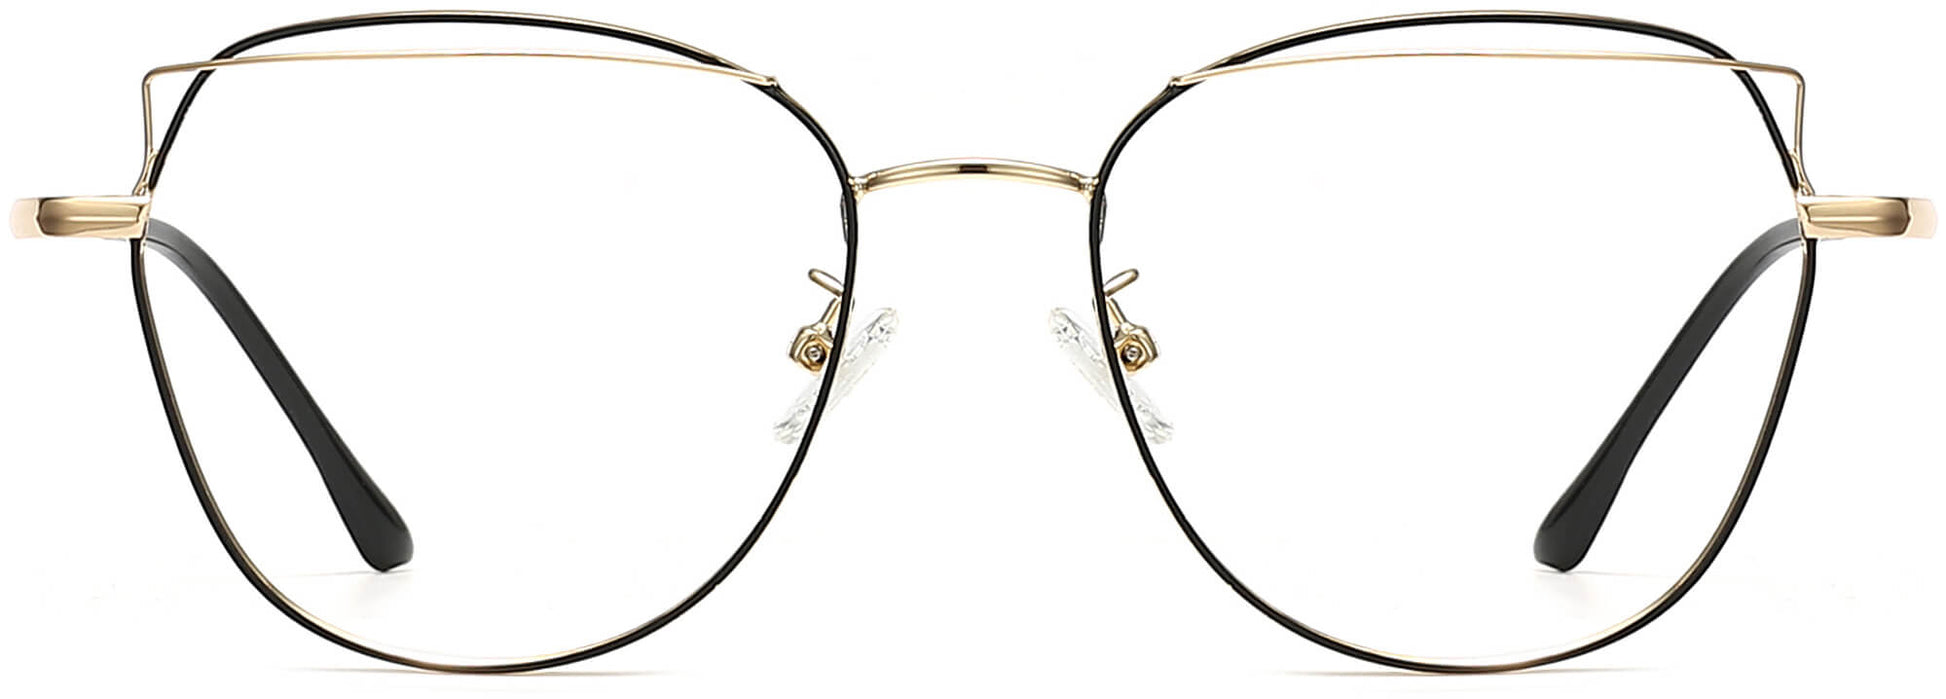 Dream Cateye Gold Eyeglasses from ANRRI, front view